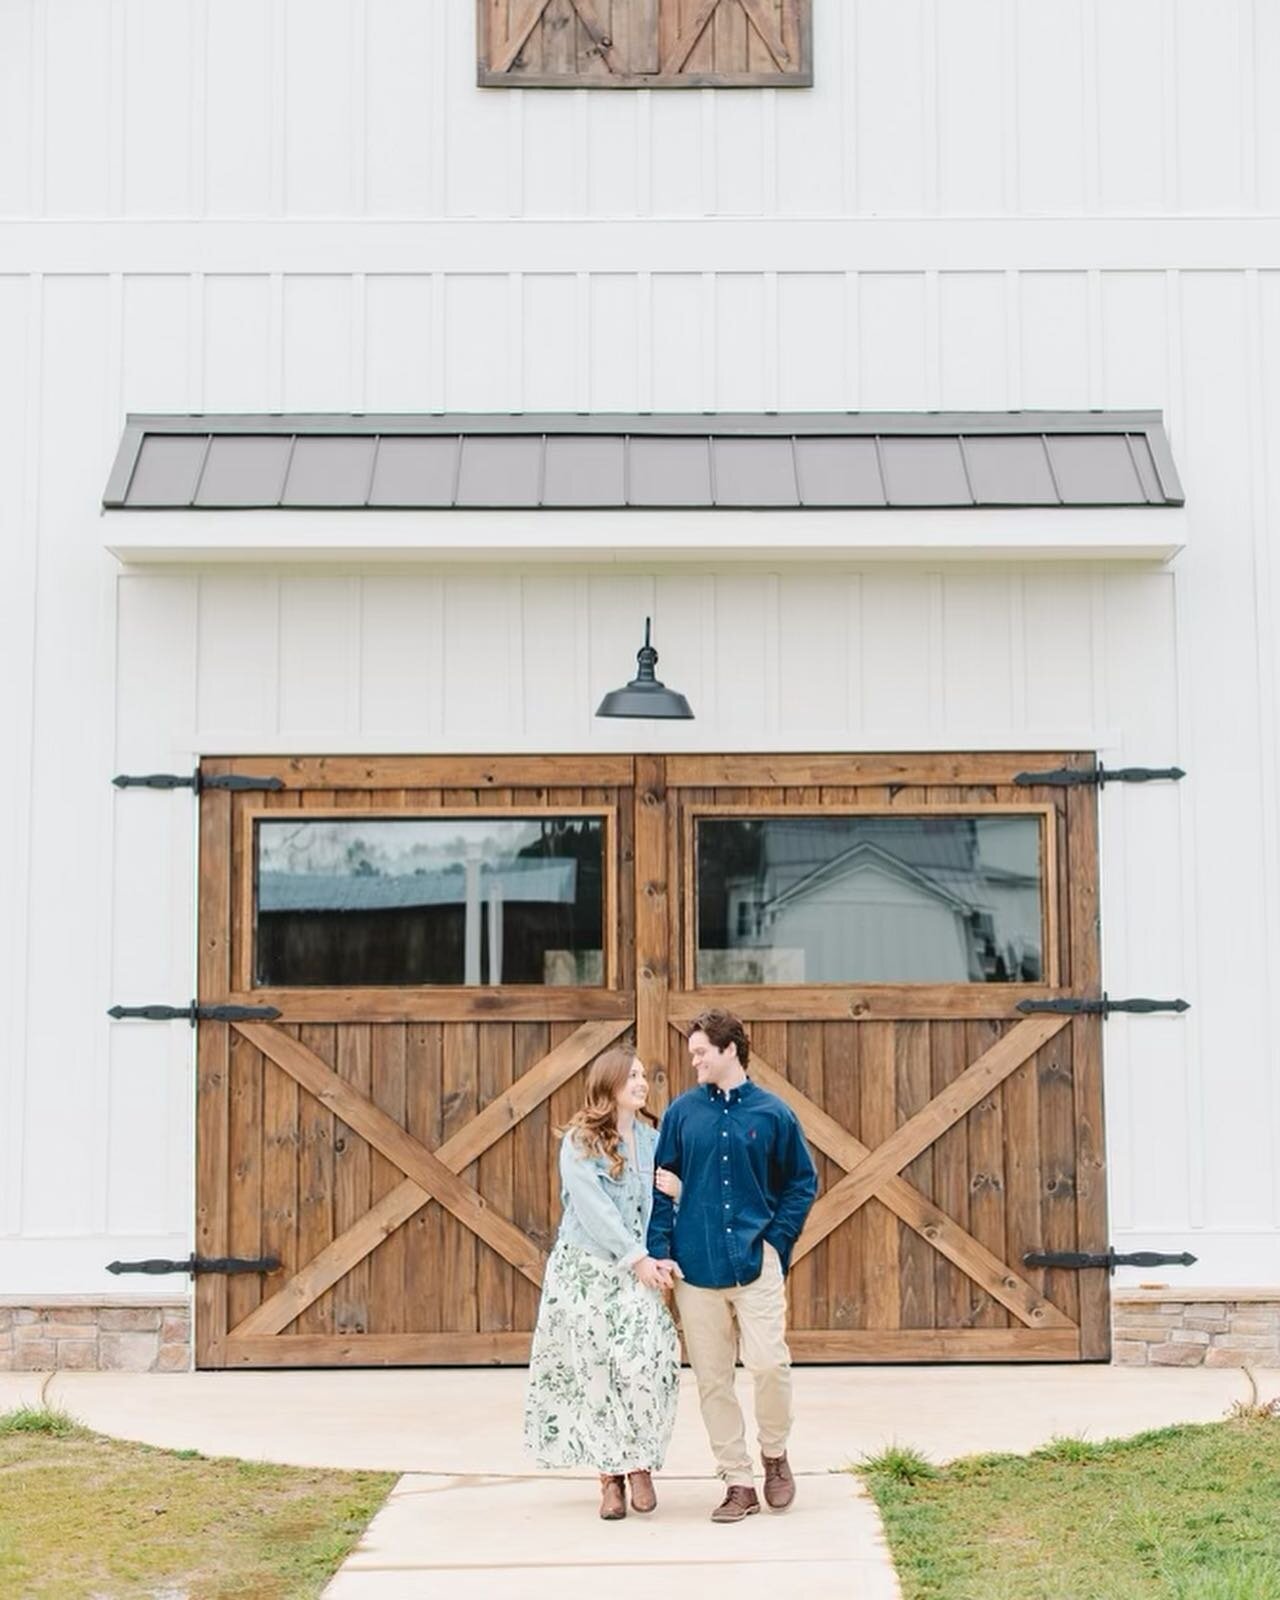 We are so excited for this couple to get married at White Oak Manor in a few months! Thank you @laurahoylephotos for sharing these images with us. 

#whiteoakmanorweddings #virginiaweddingvenue #barnvenue #virginiaweddings